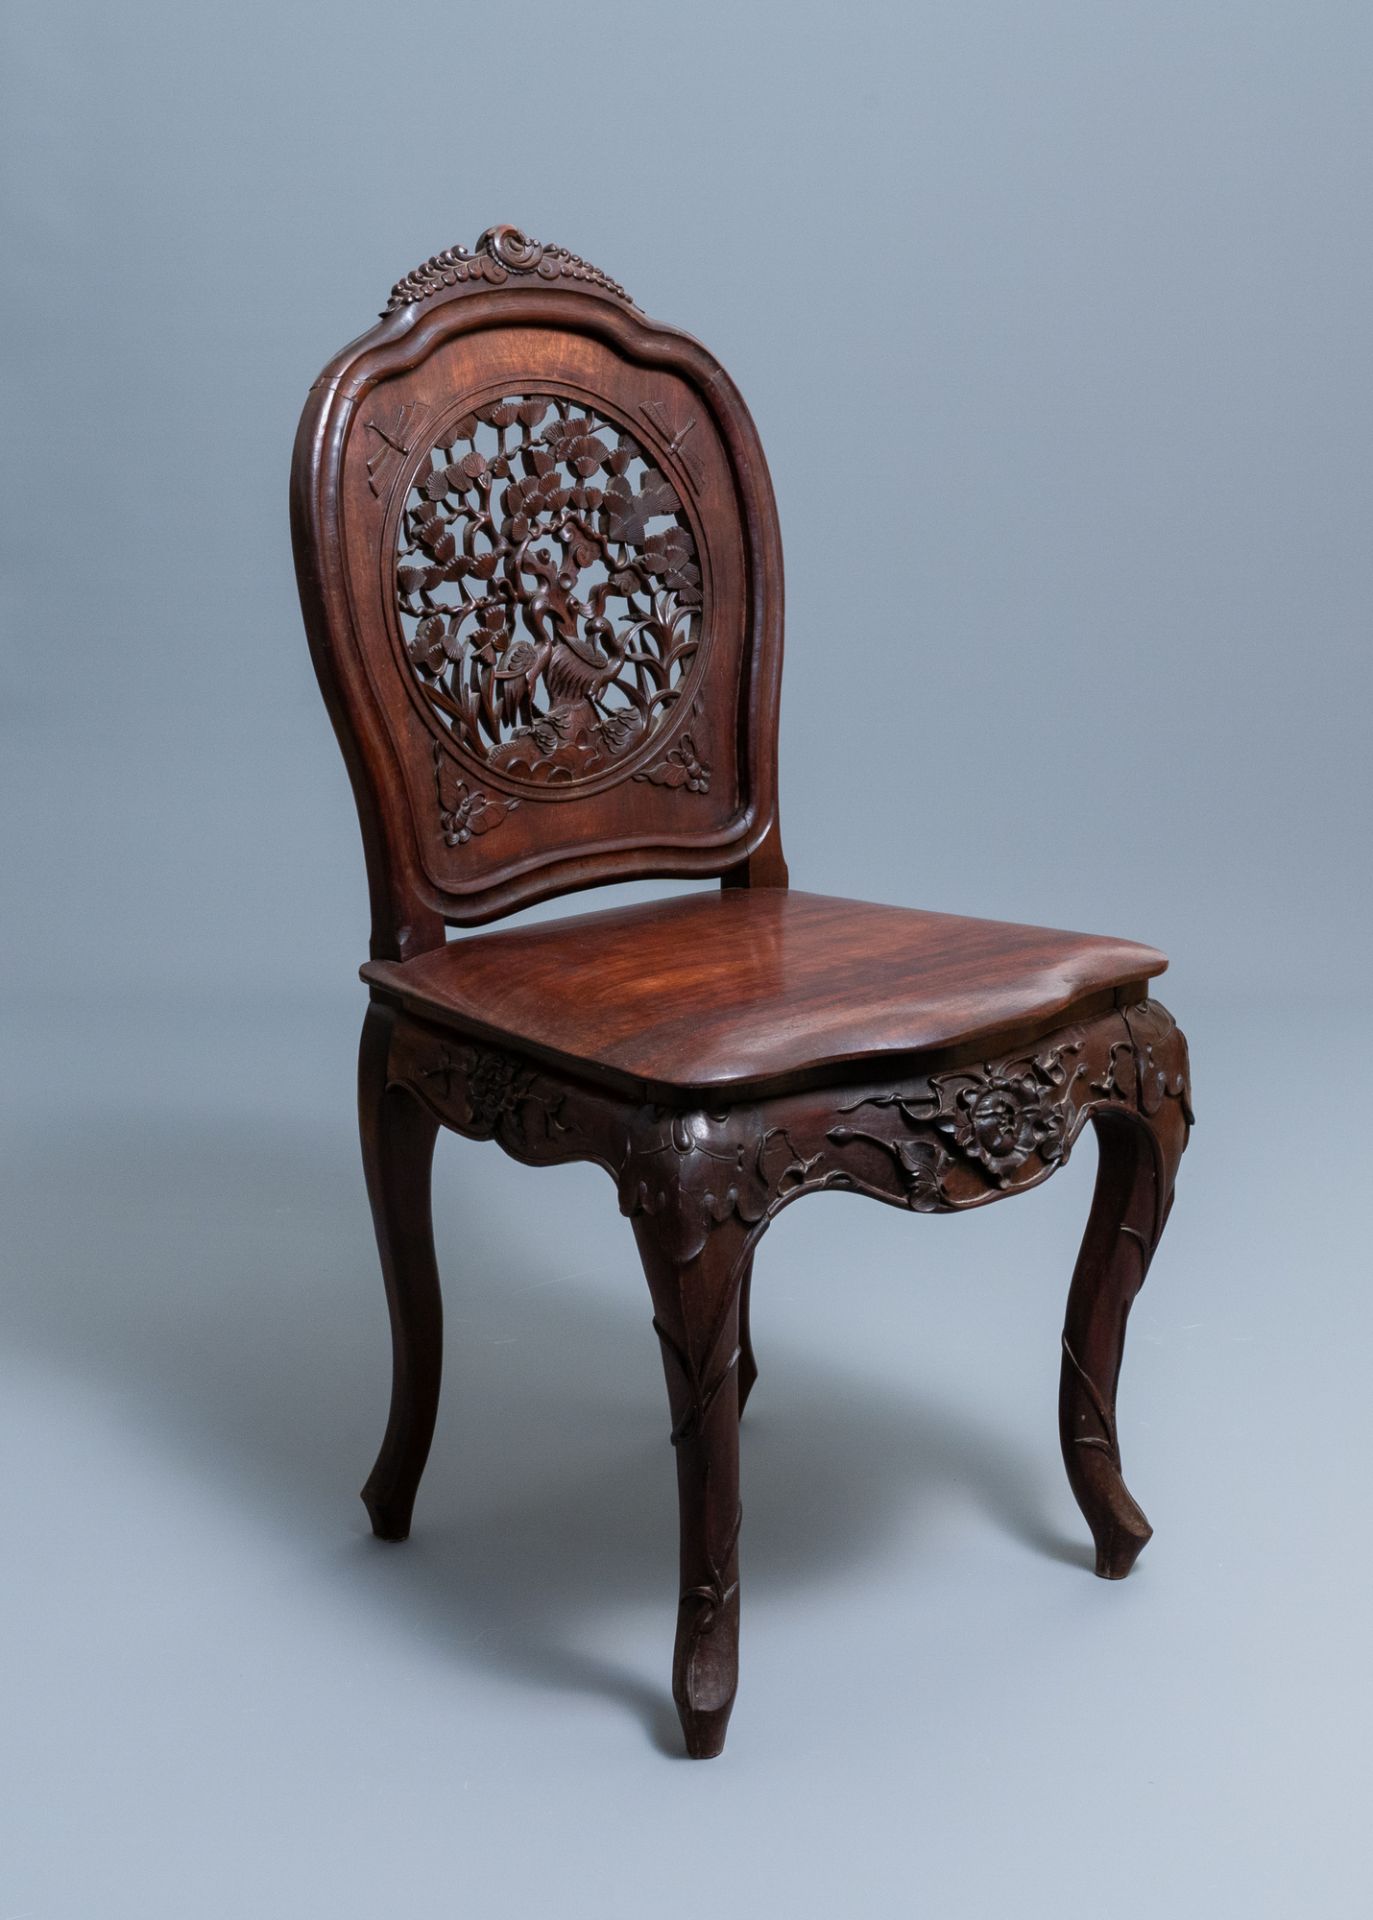 Four wooden chairs with reticulated backs, Macao or Portuguese colonial, 19th C. - Image 2 of 47